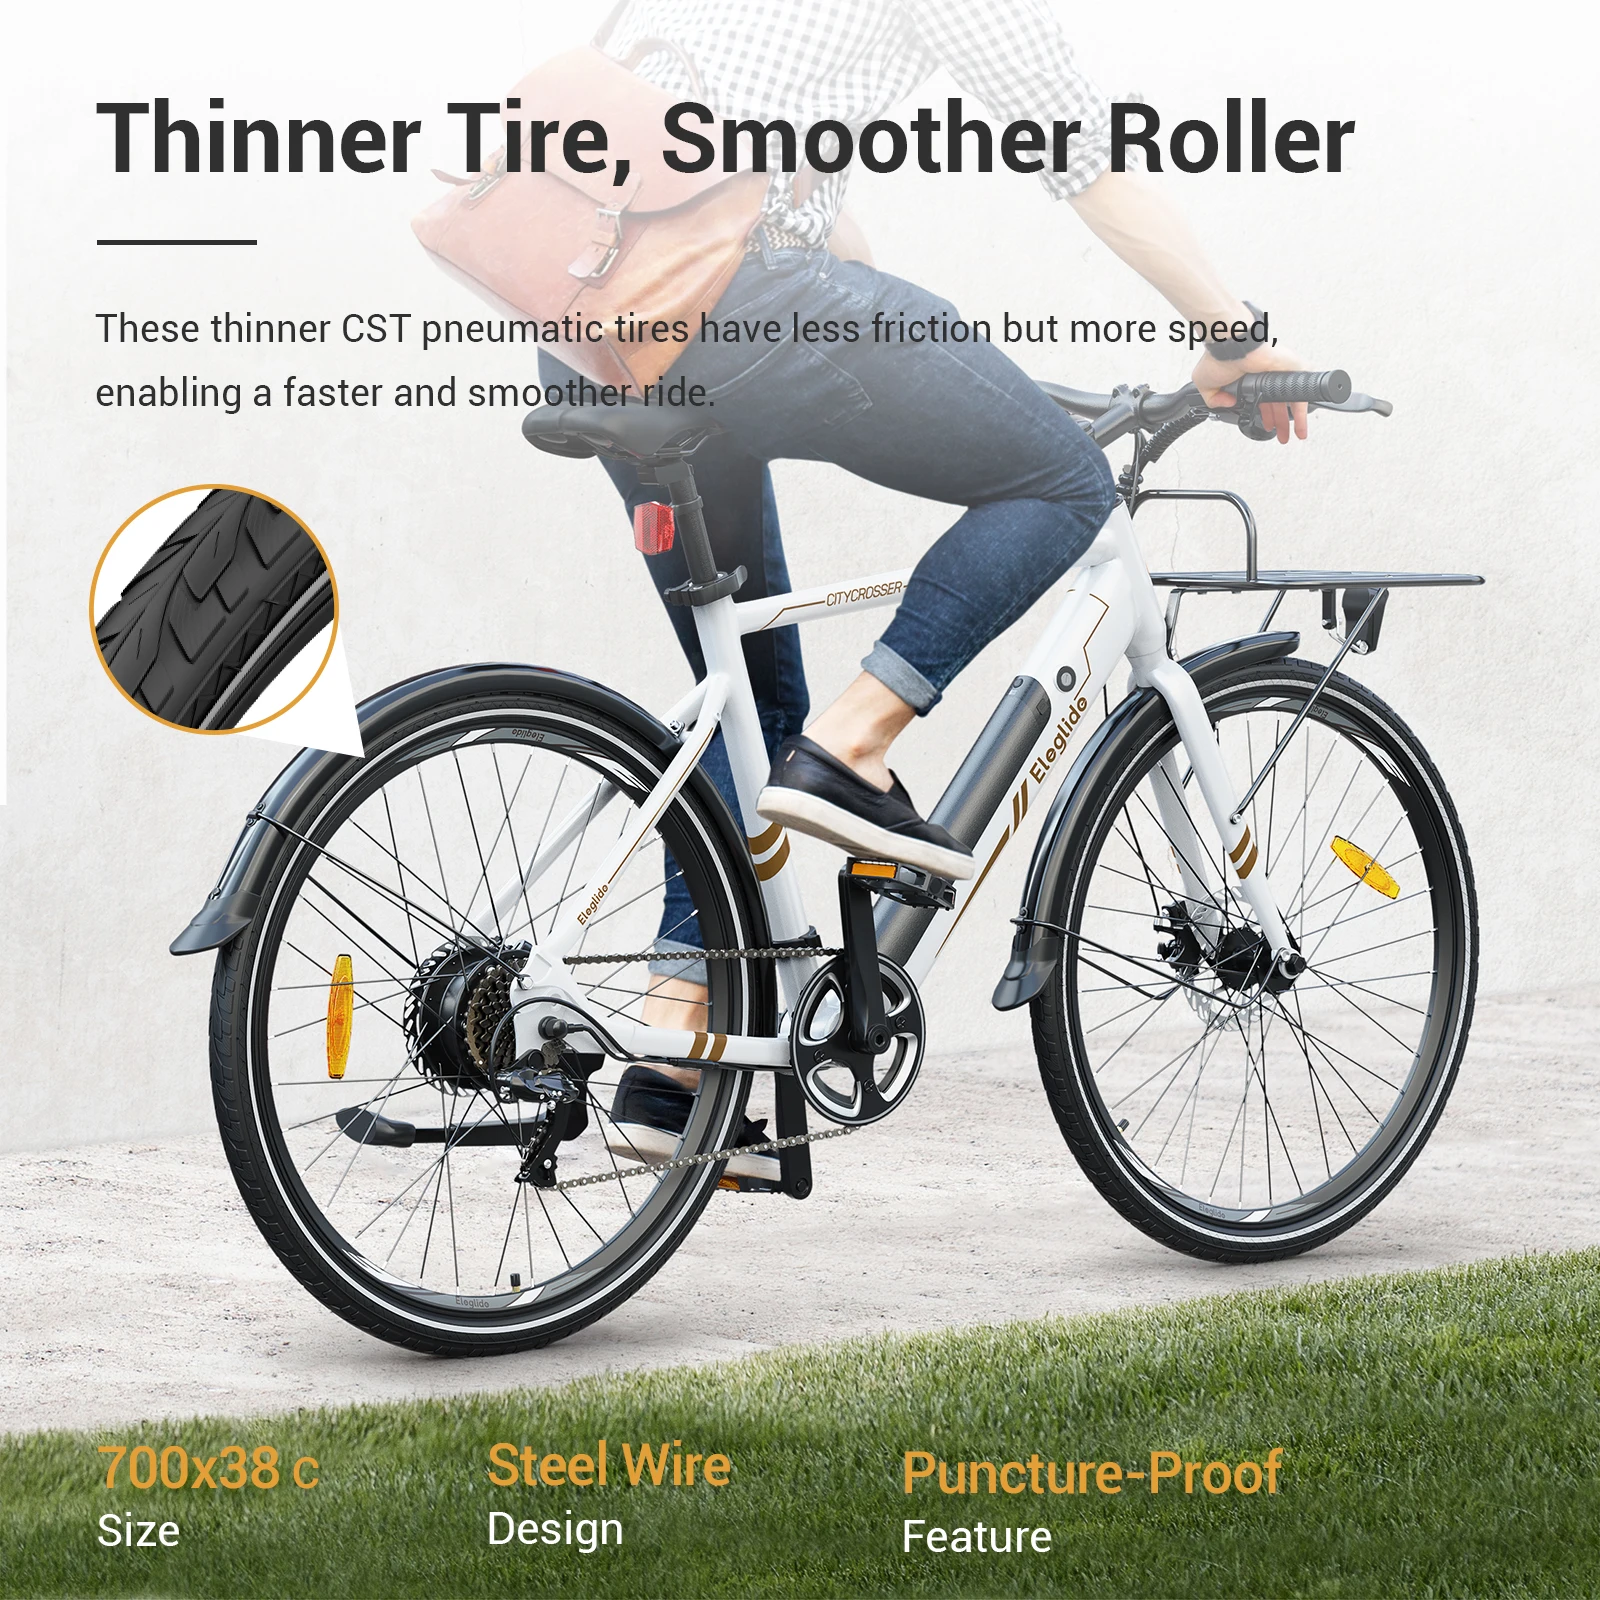 Thinner Tire, Smoother Roller